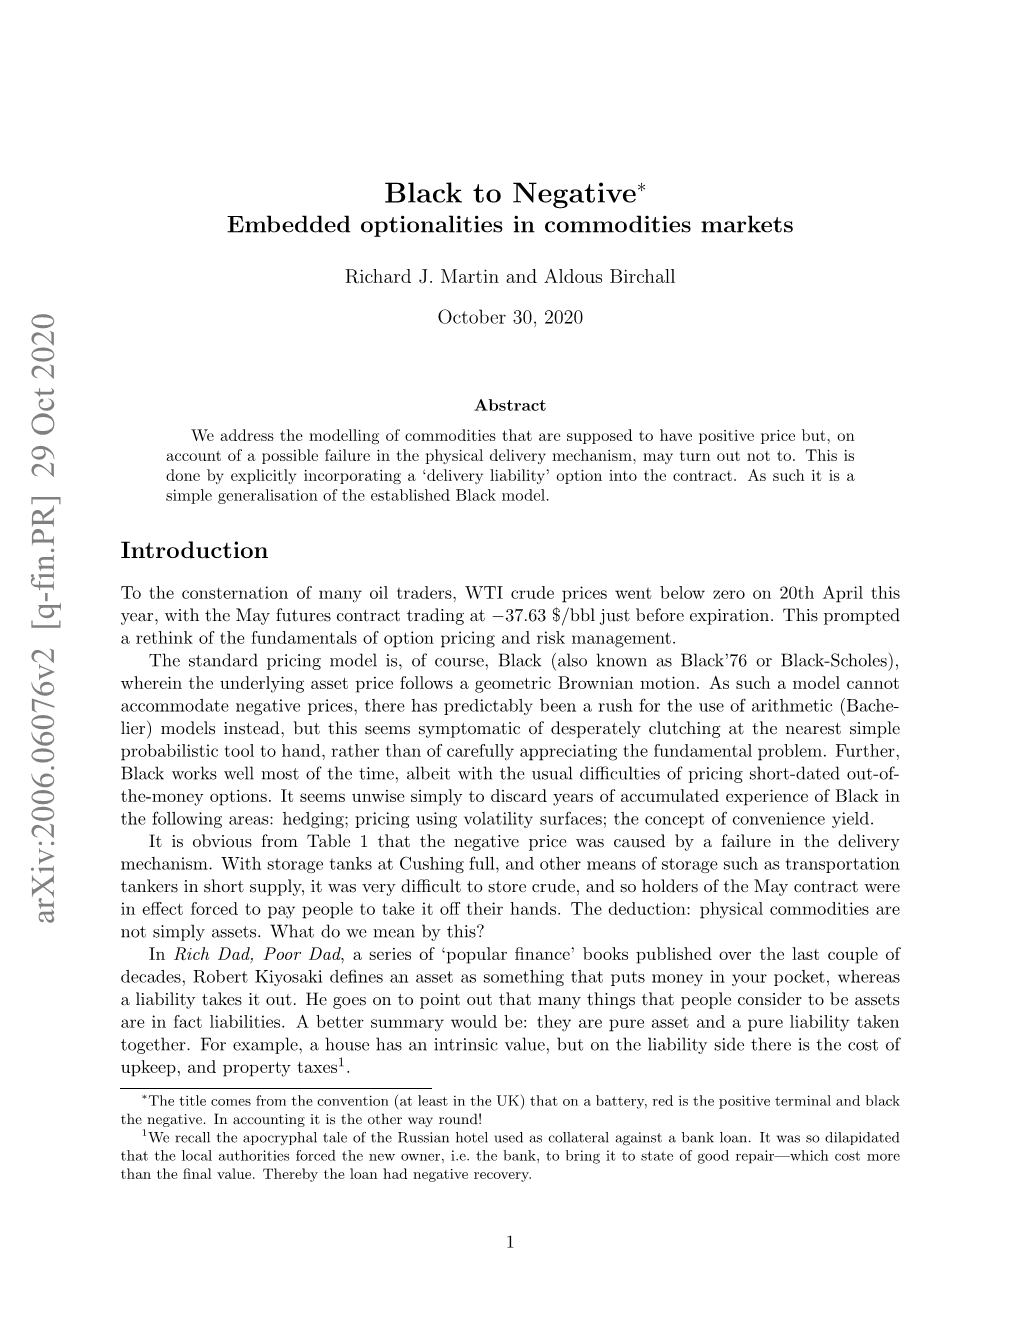 Black to Negative: Embedded Optionalities in Commodities Markets